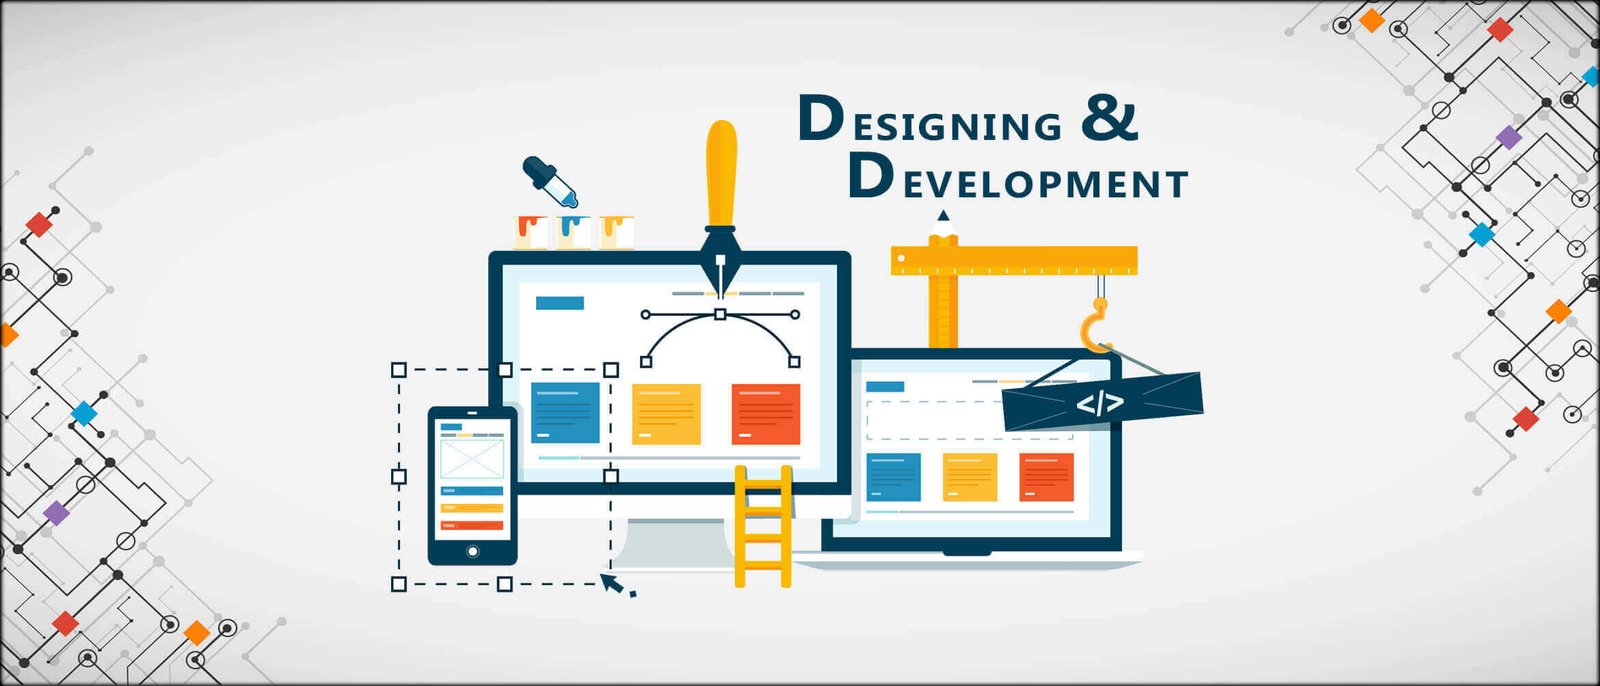 Design and Development in Digital Products